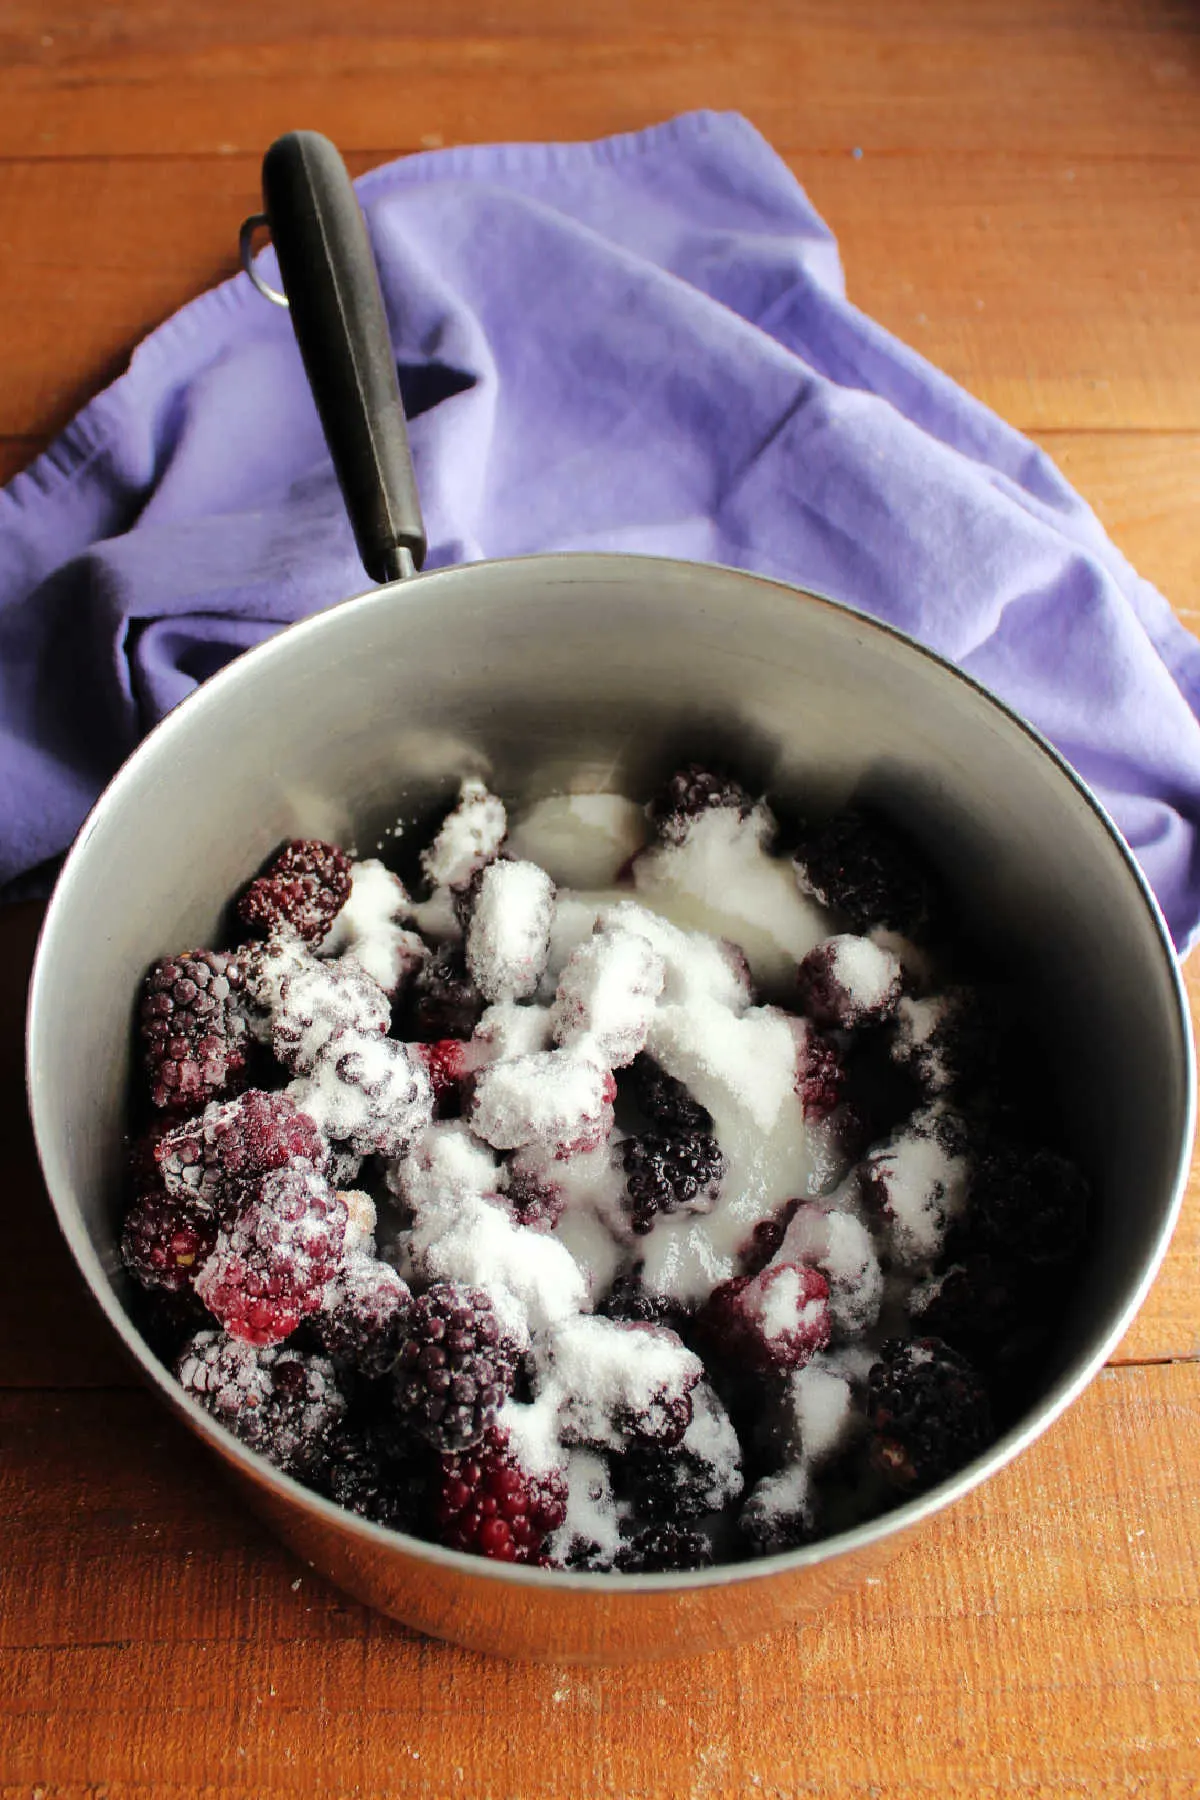 Saucepan filled with frozen blackberries, sugar and lemon juice, ready to cook.